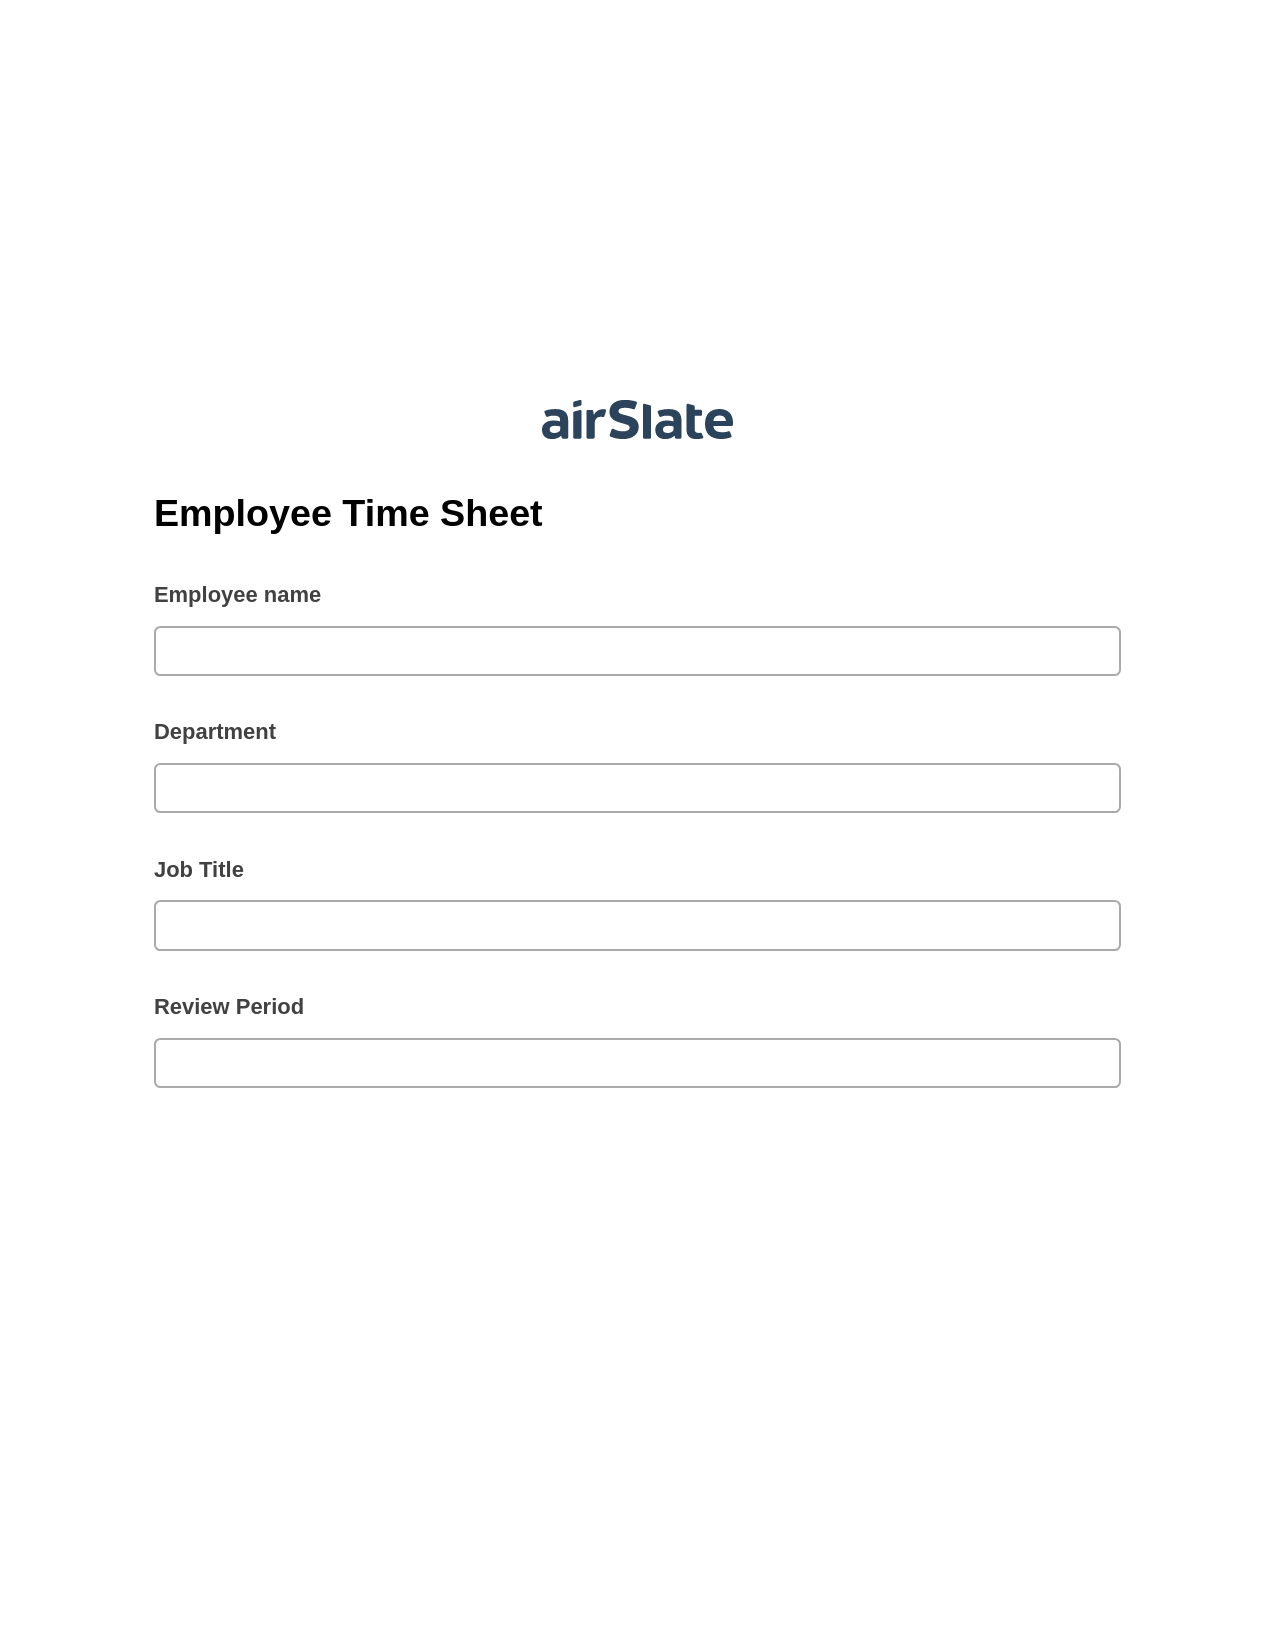 Multirole Employee Time Sheet Pre-fill from Salesforce Records Bot, Create Salesforce Records Bot, Archive to OneDrive Bot